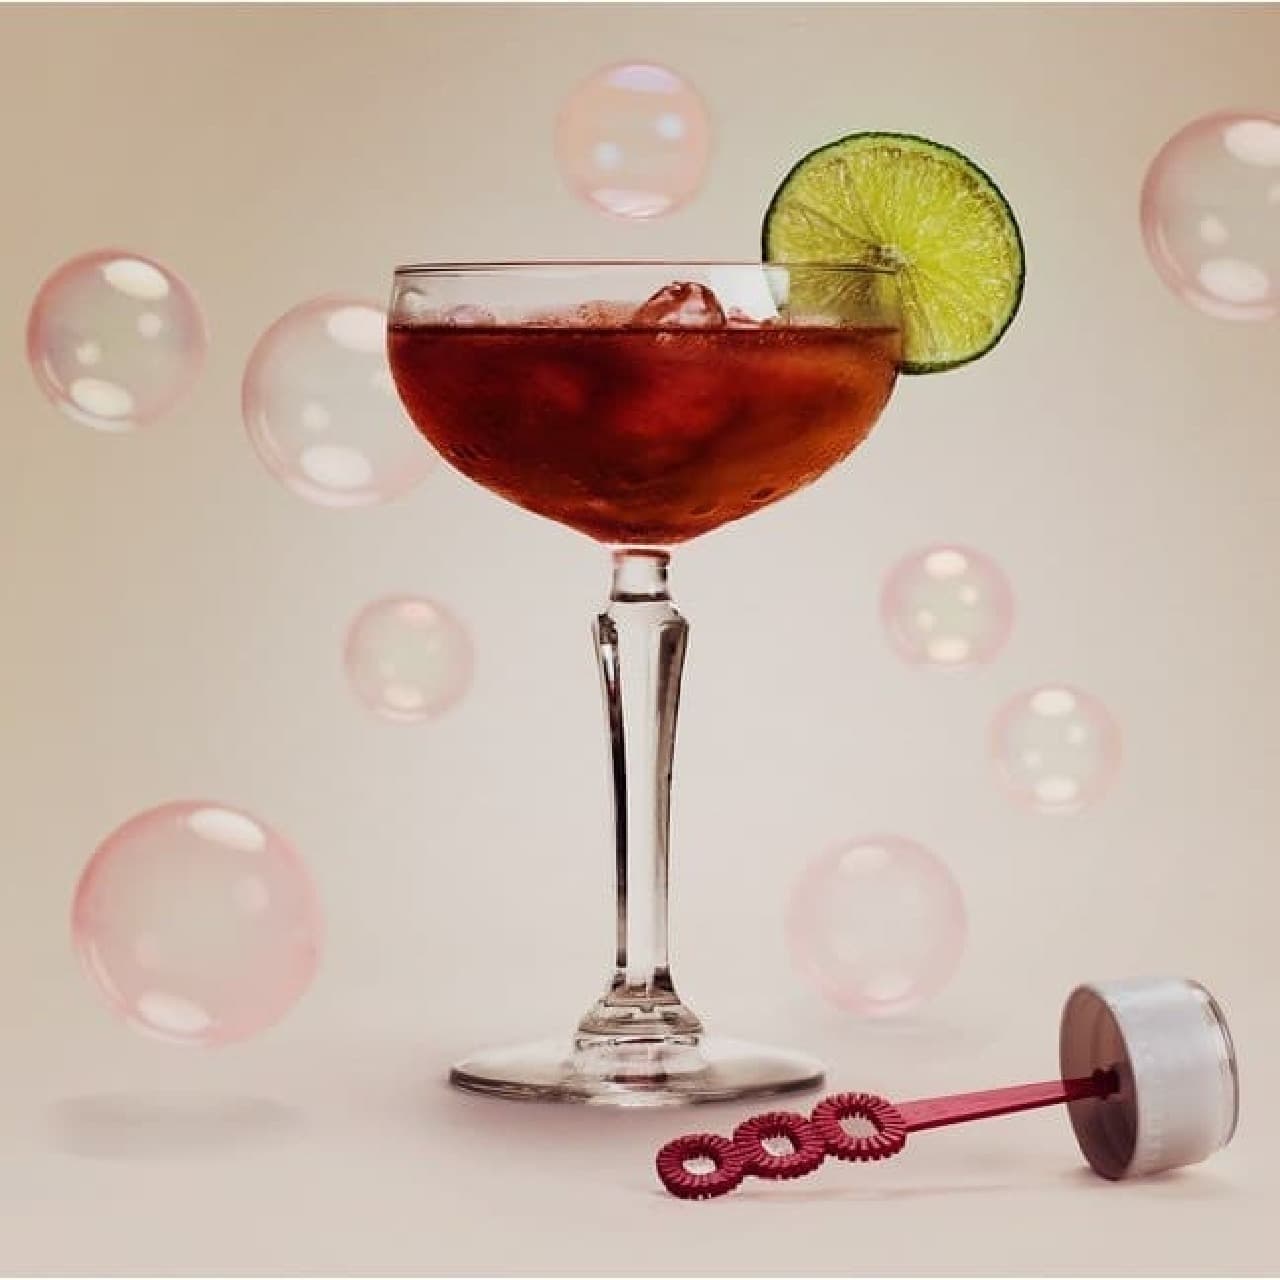 "Bubble Lick" Use Case 2: Example of use for adults